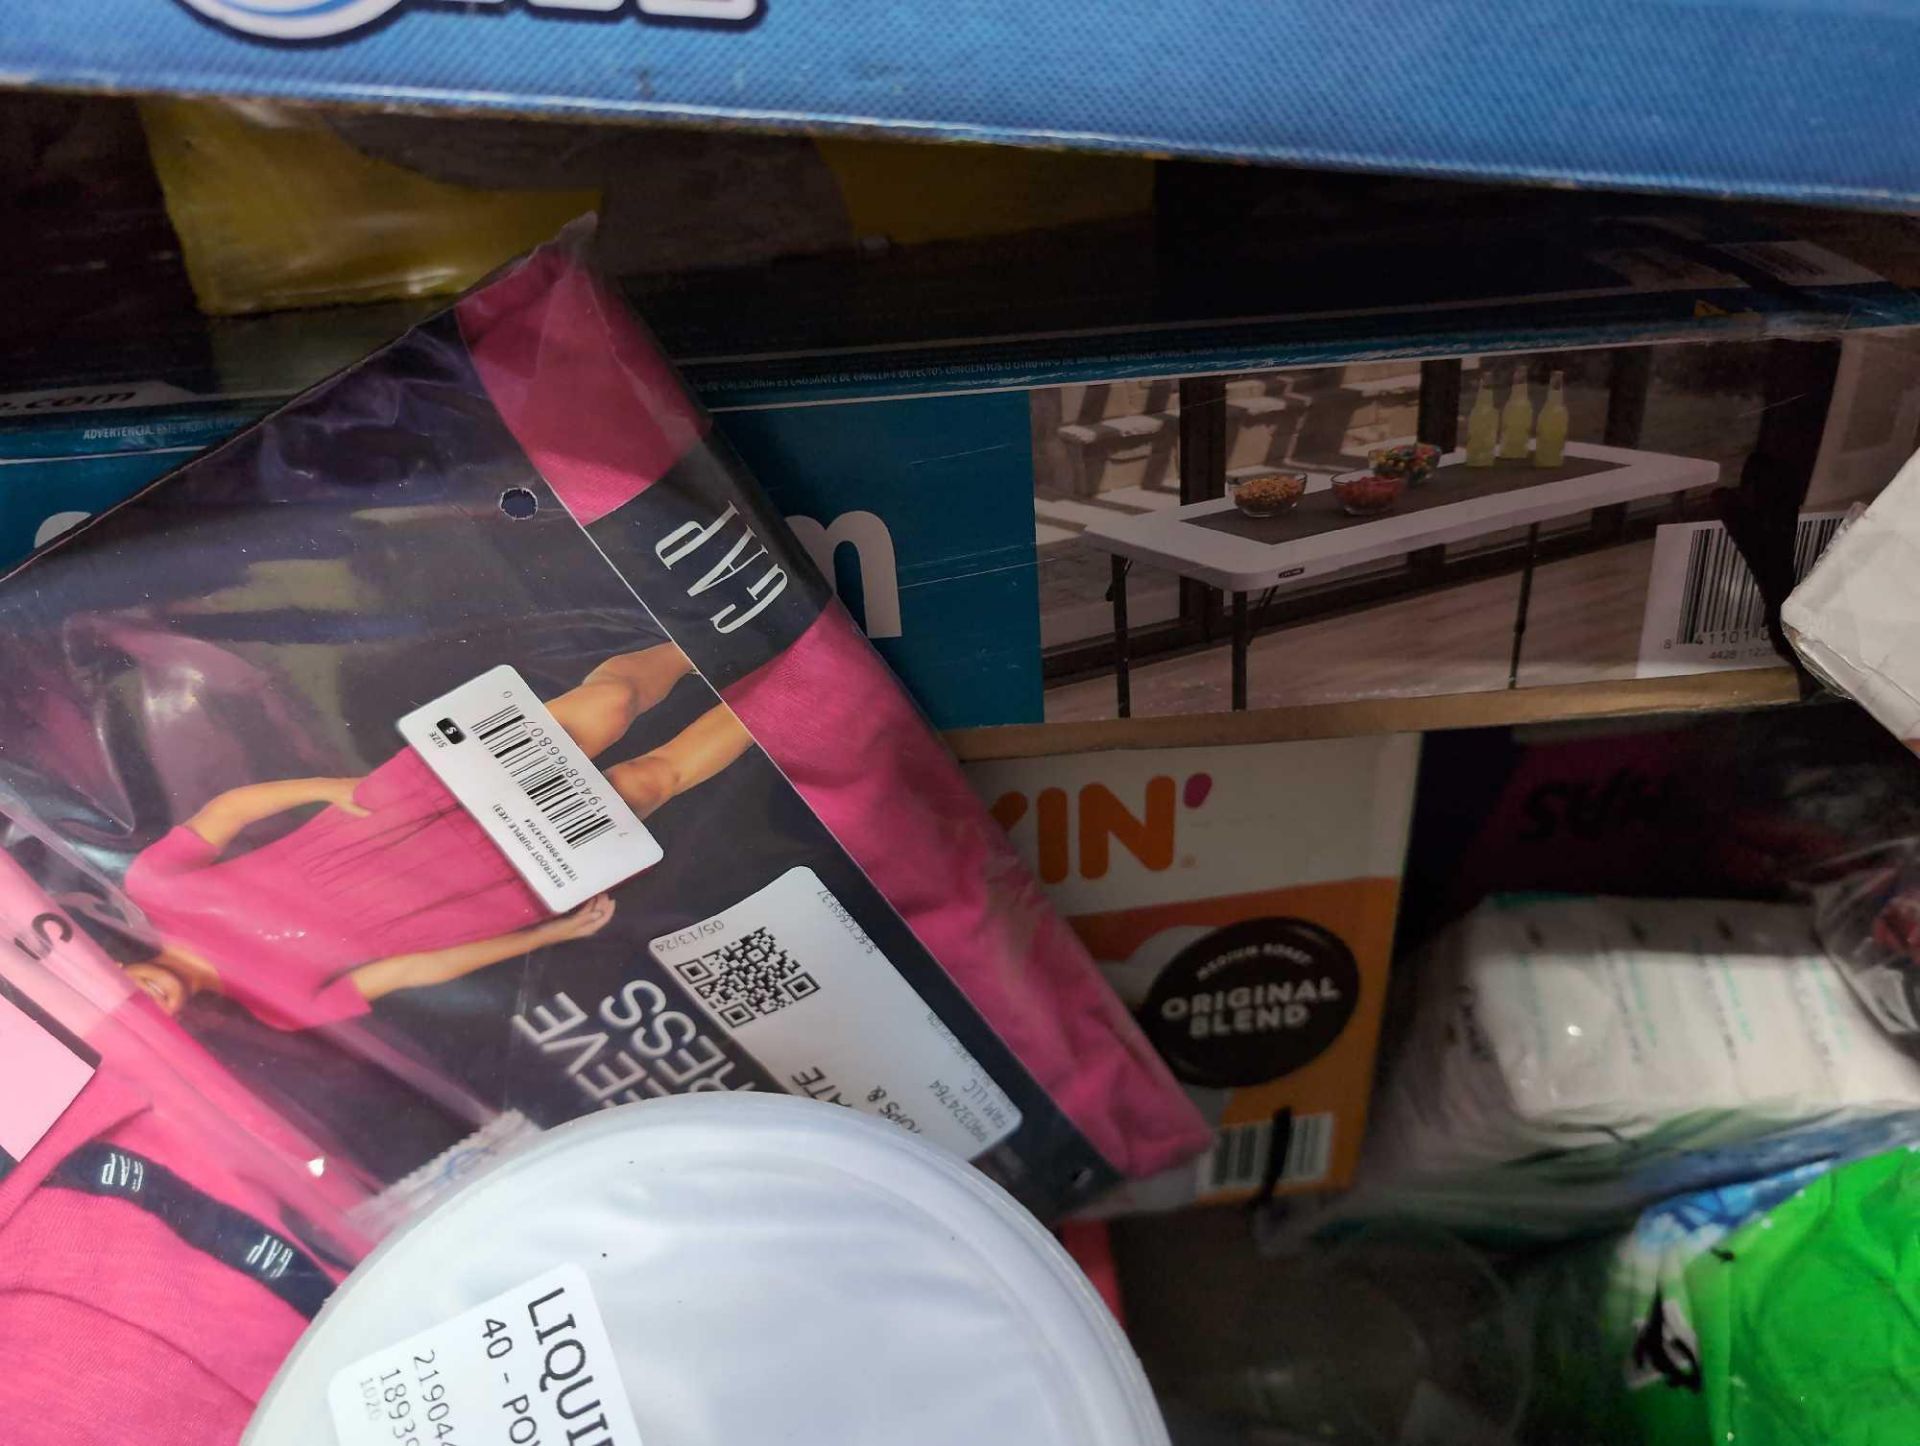 Big box store in a box, pampers, Sheets, Blanket, Intex blow up bed, swiffer wet cloths, gold fish, - Image 15 of 20